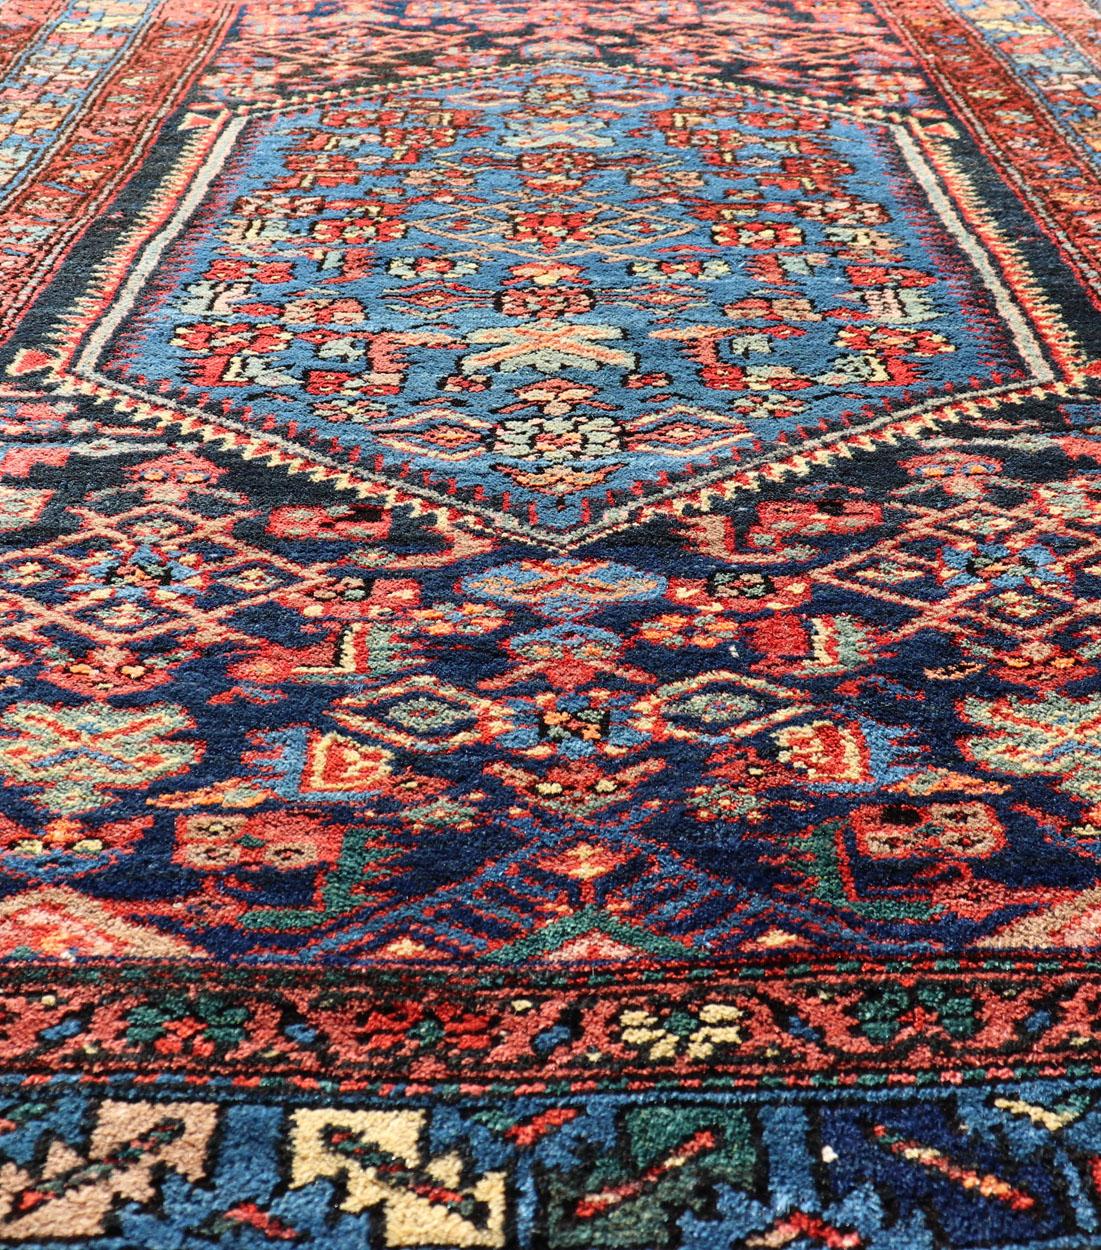 Antique Persian Bidjar Carpet with Variety of Blue Colors, Red, and Salmon For Sale 6